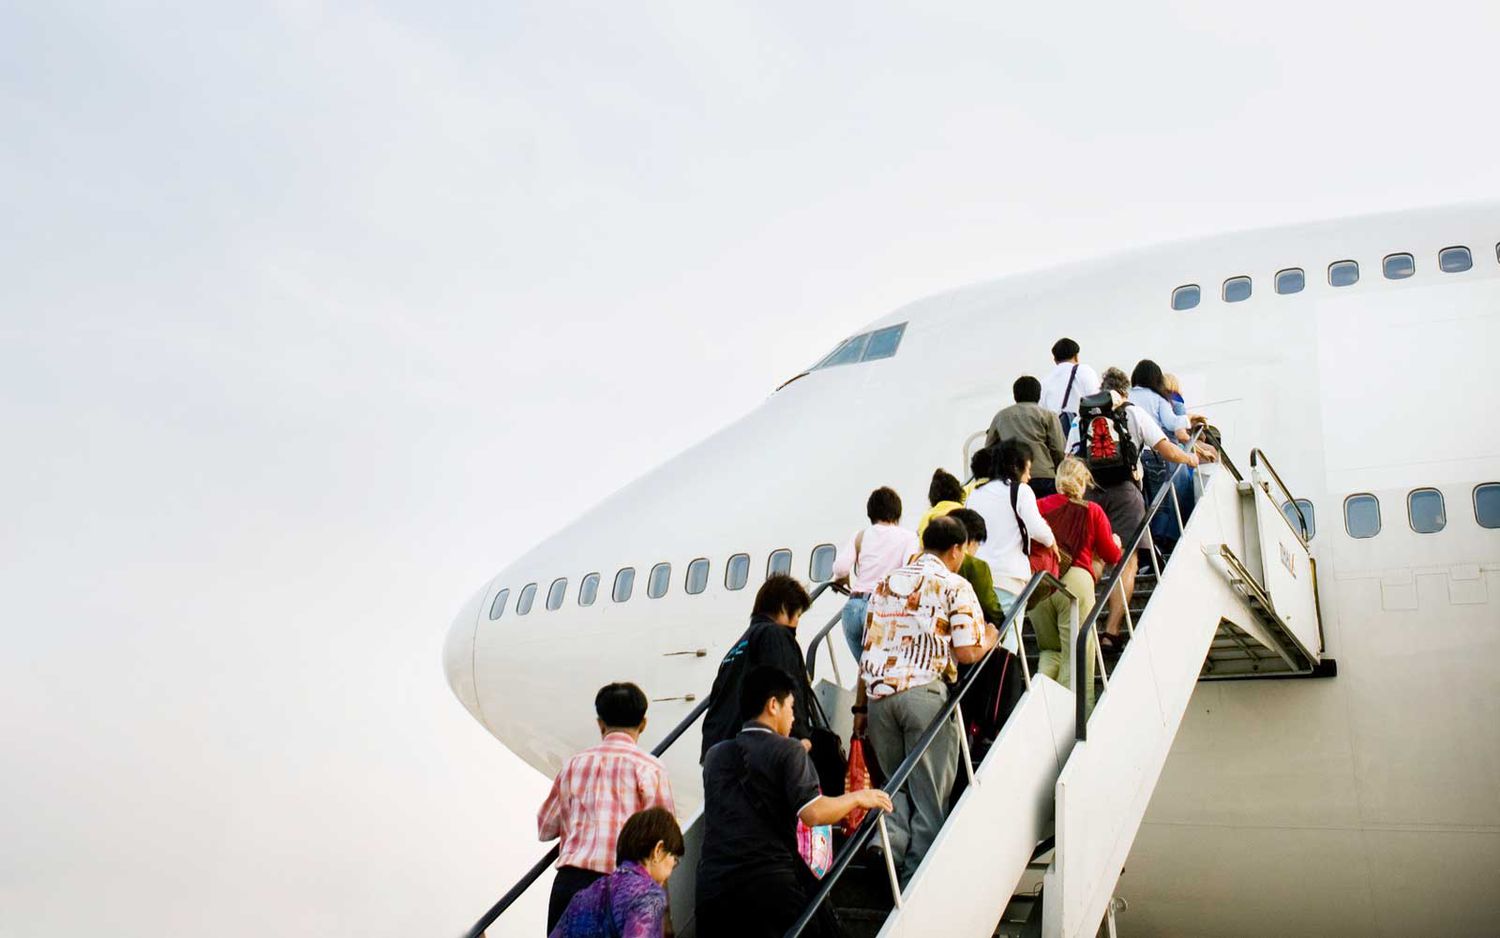 7 Important Things to Consider Before Boarding a Plane